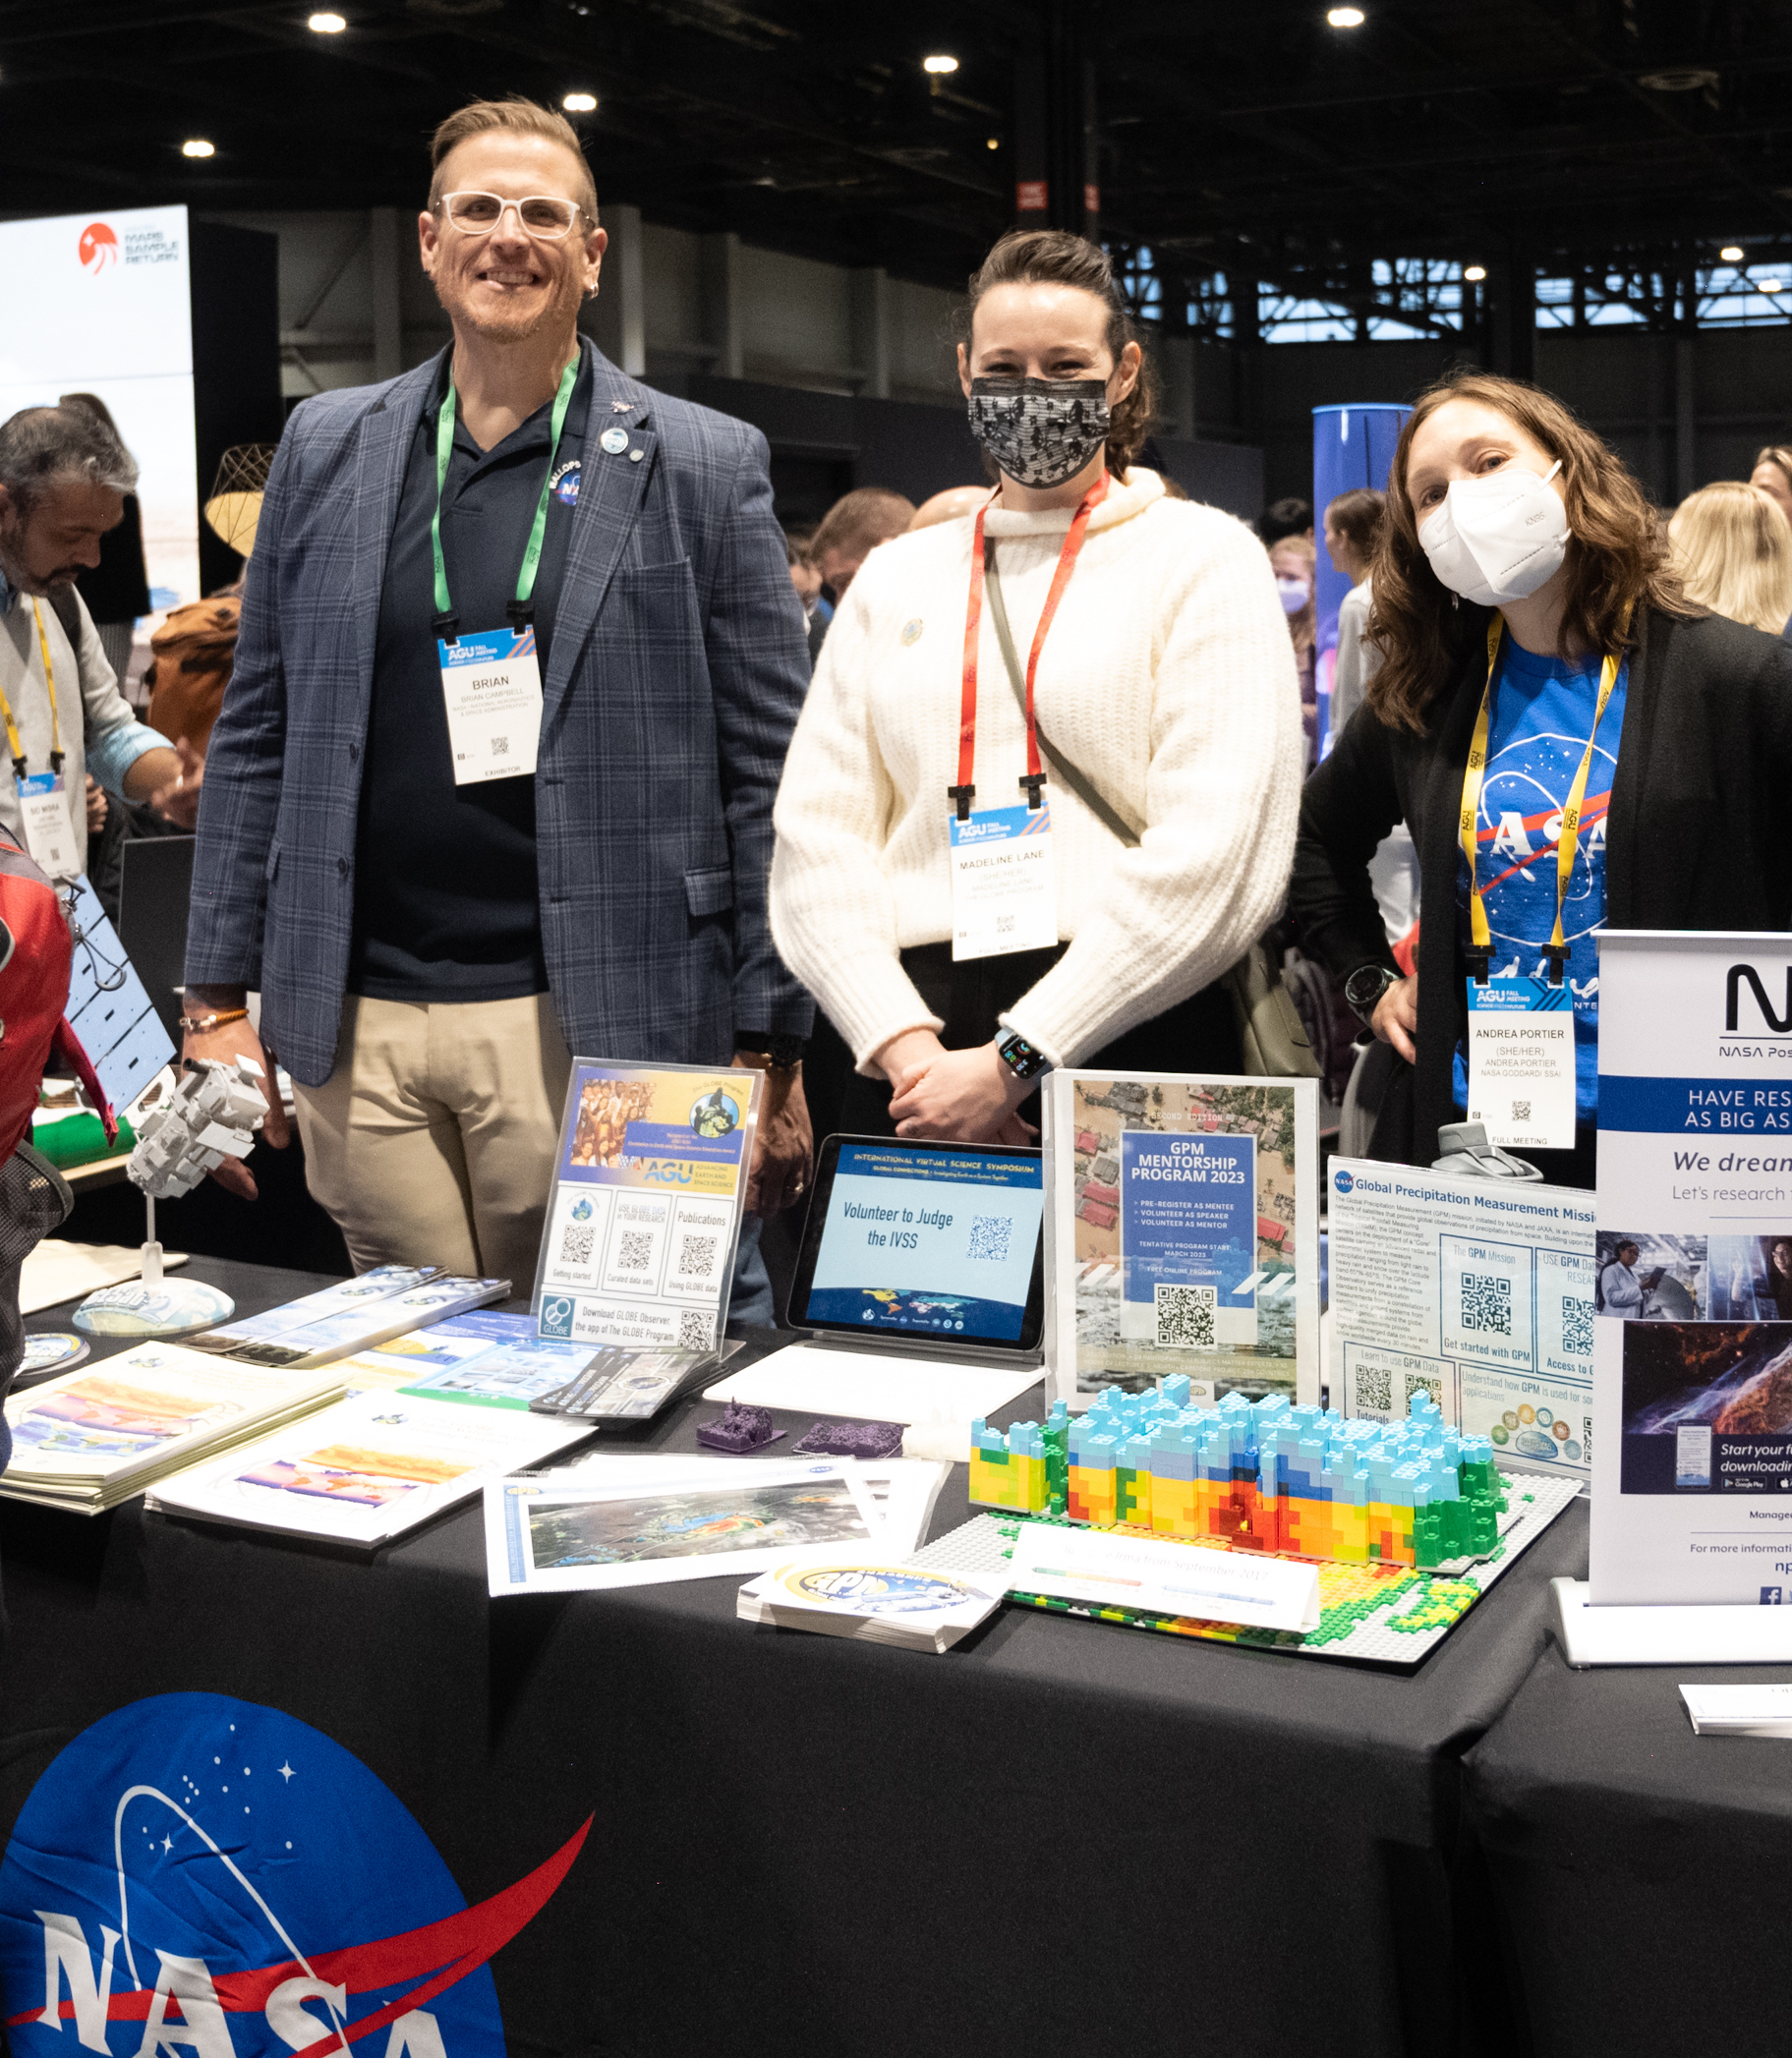 Three people, one man and two women, stand behind a table with a NASA tablecloth. On the table are handouts and resources related to the GLOBE Program as well as materials related to the Global Precipitation Measurement Mission satellite.